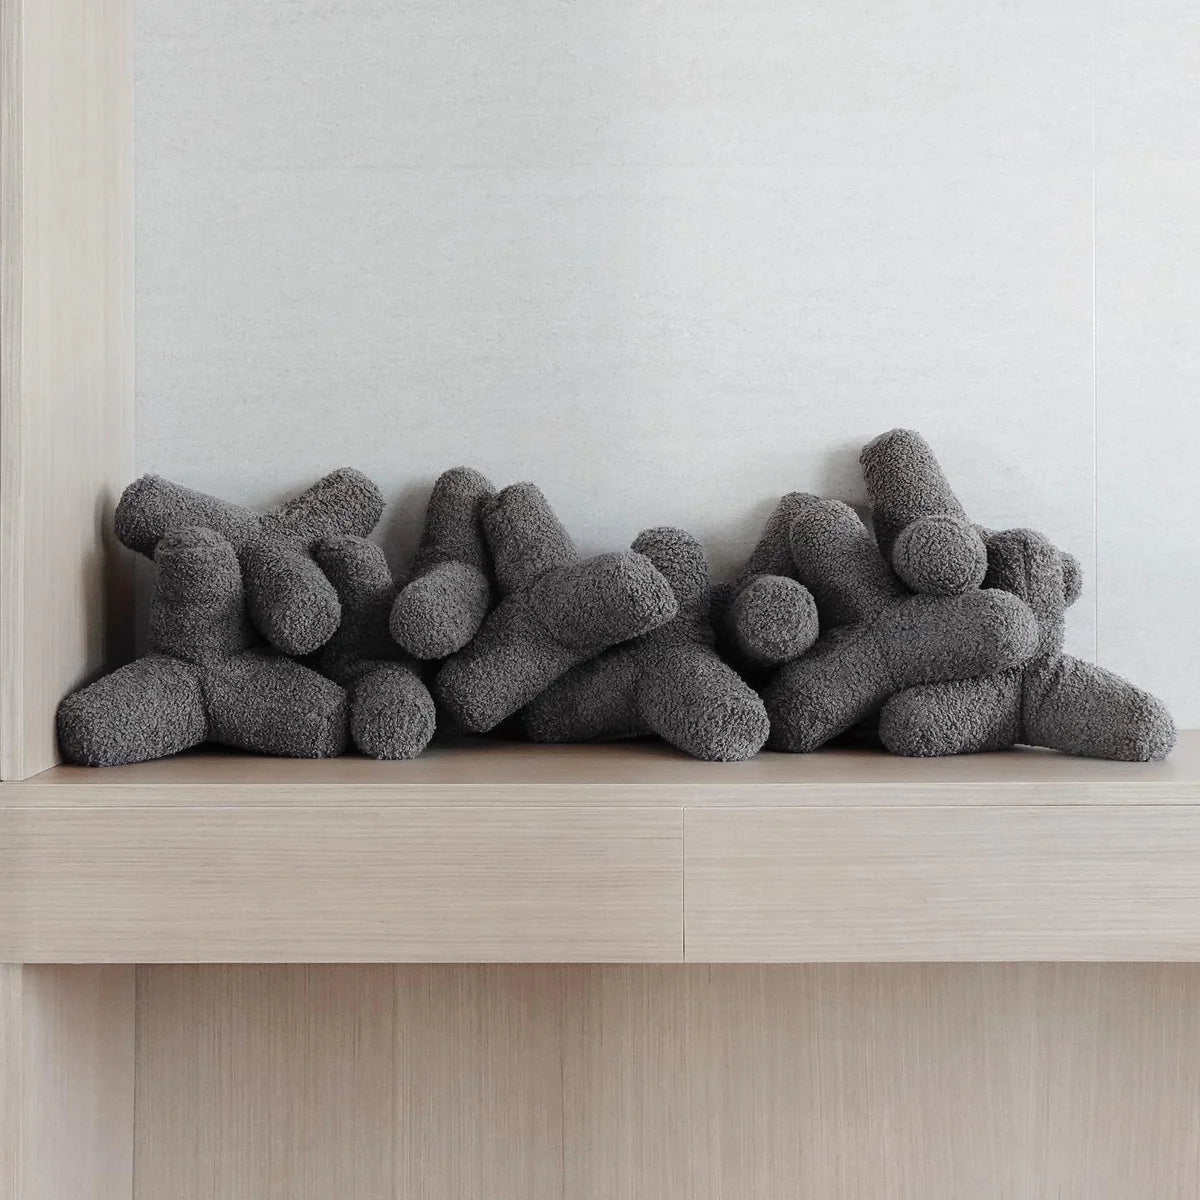 Concrete O Breuer | Oversized Play Object with Super Squeakers